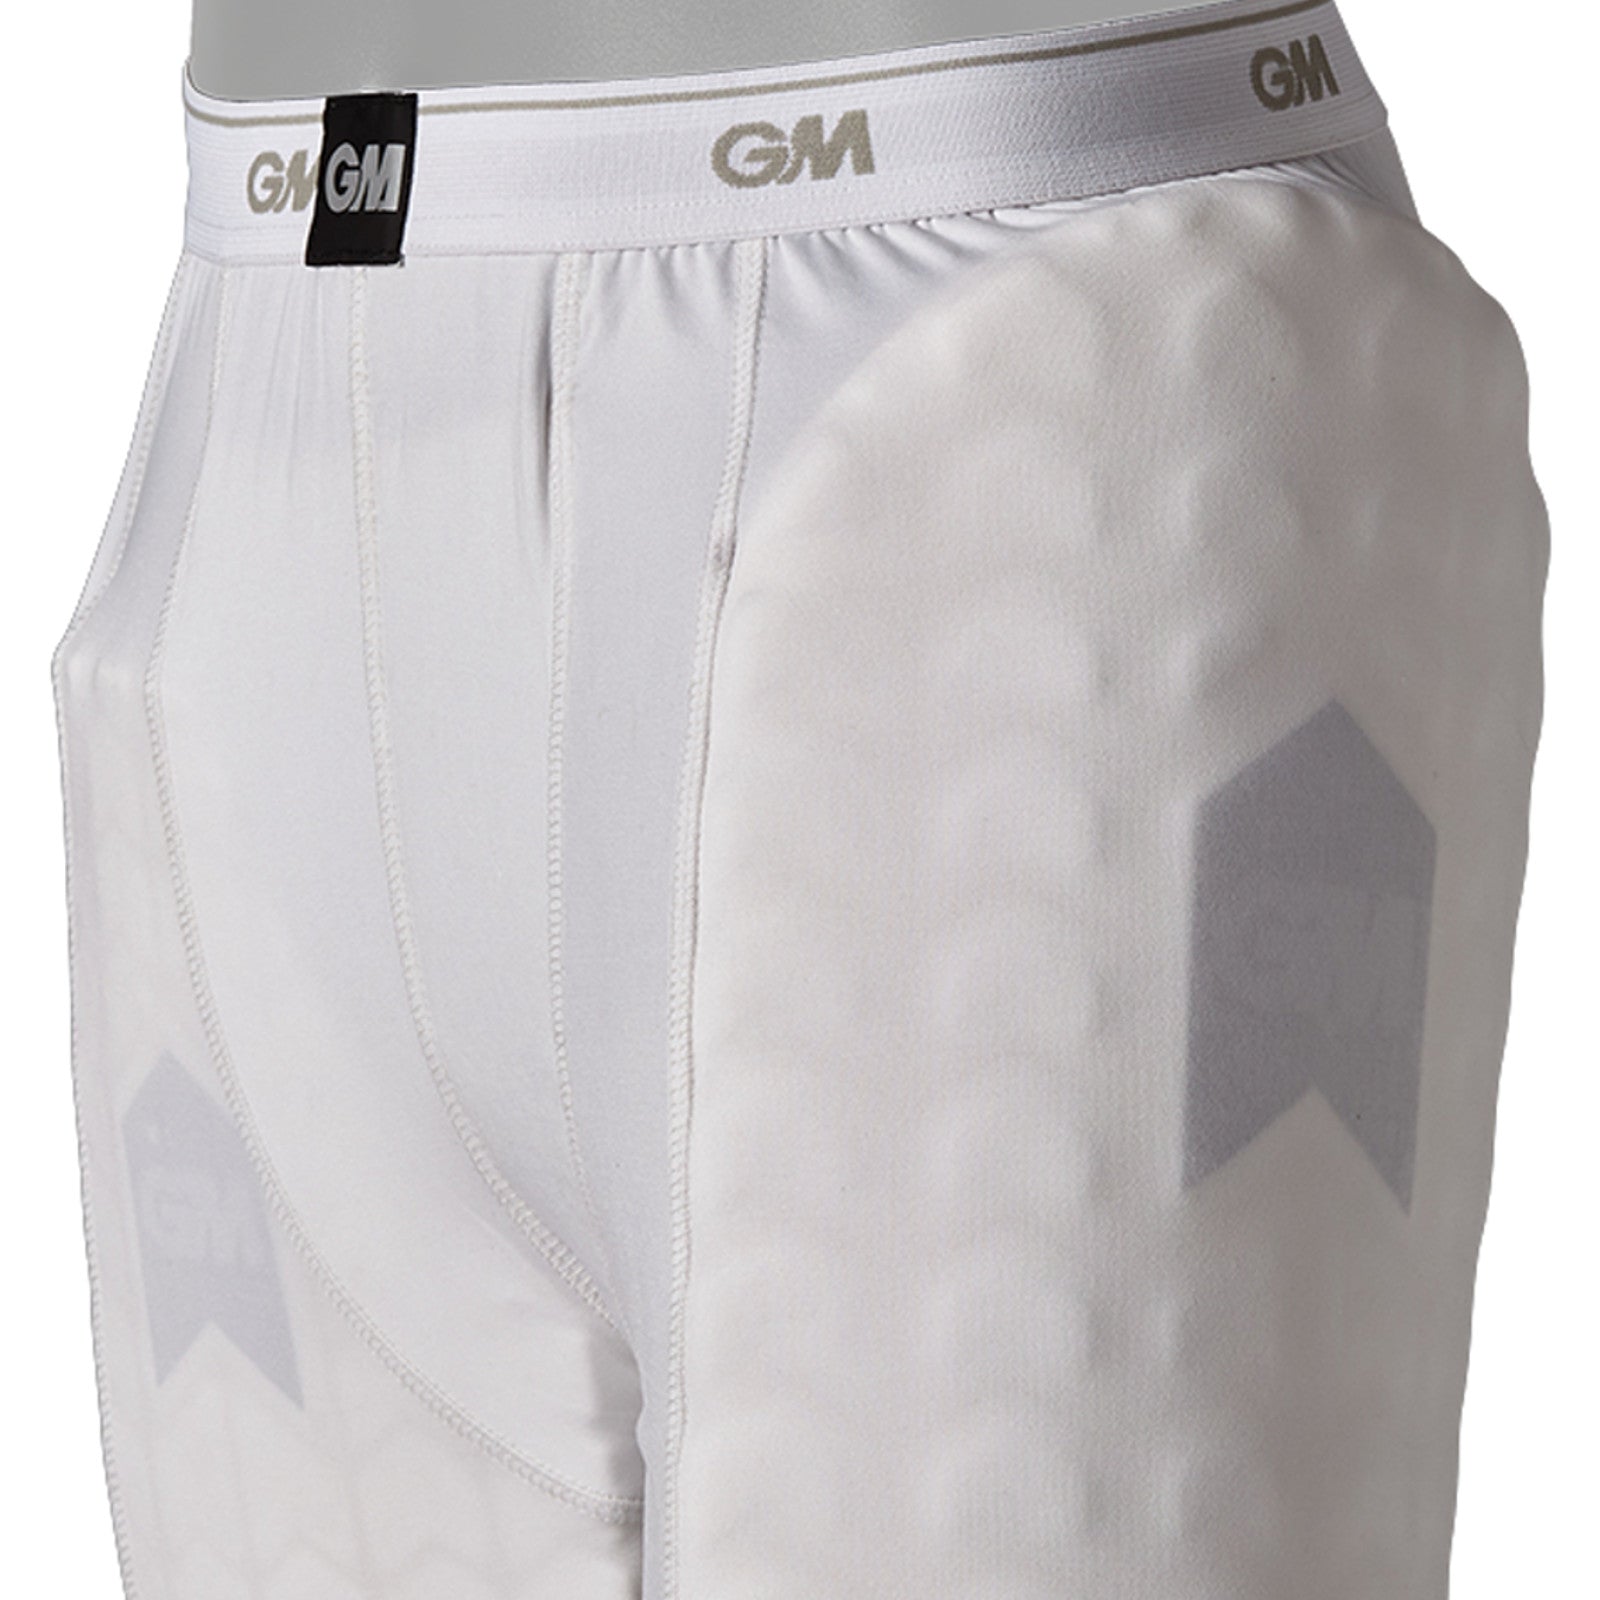 G&M 909 Cricket Protection Shorts Youth Alternate 2